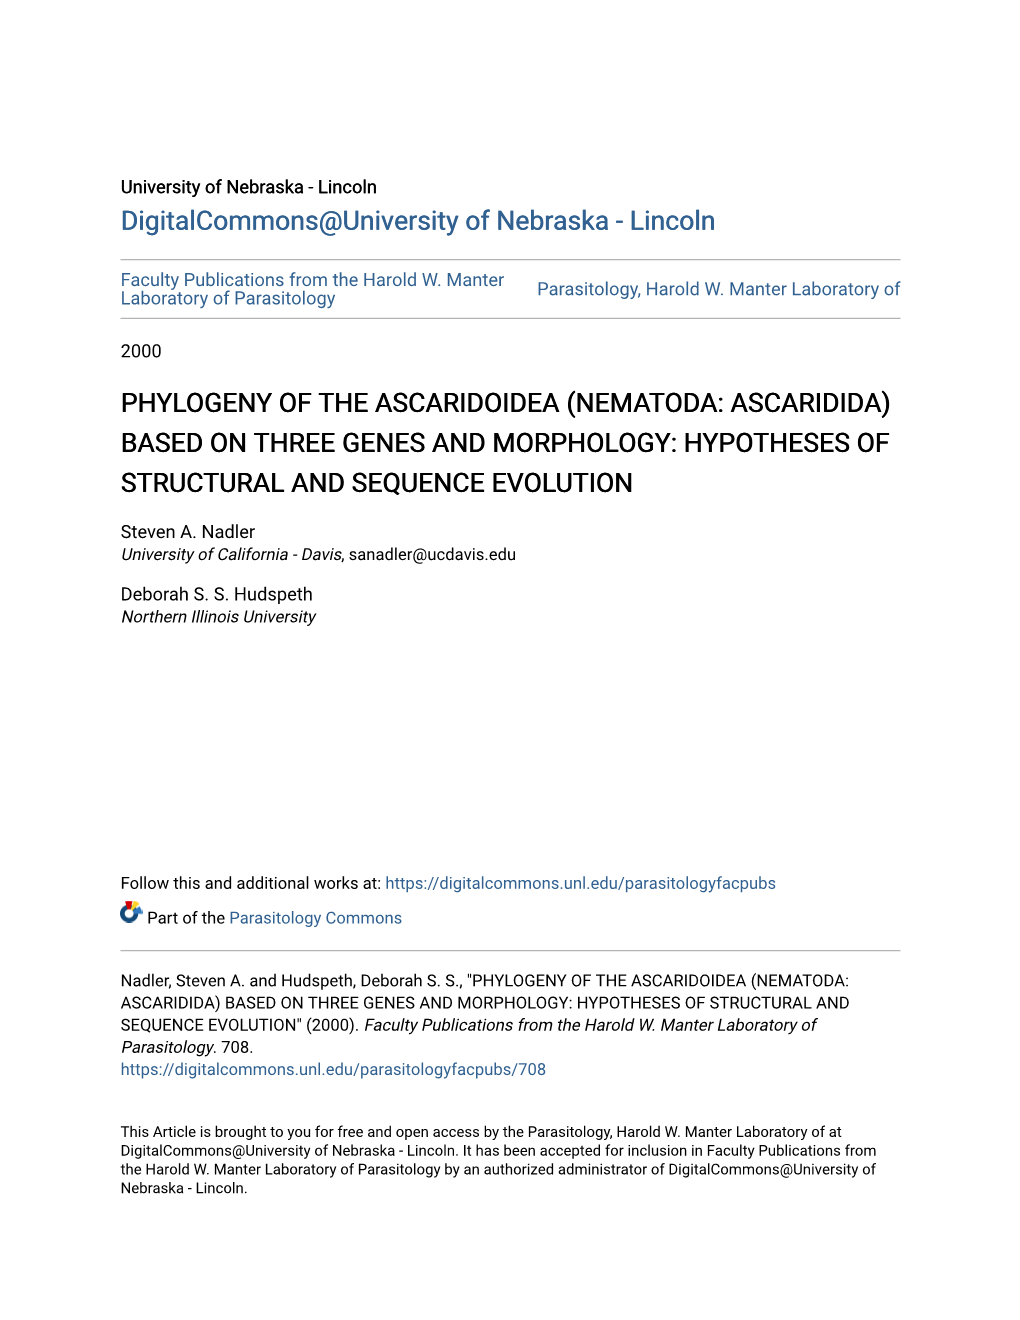 Phylogeny of the Ascaridoidea (Nematoda: Ascaridida) Based on Three Genes and Morphology: Hypotheses of Structural and Sequence Evolution